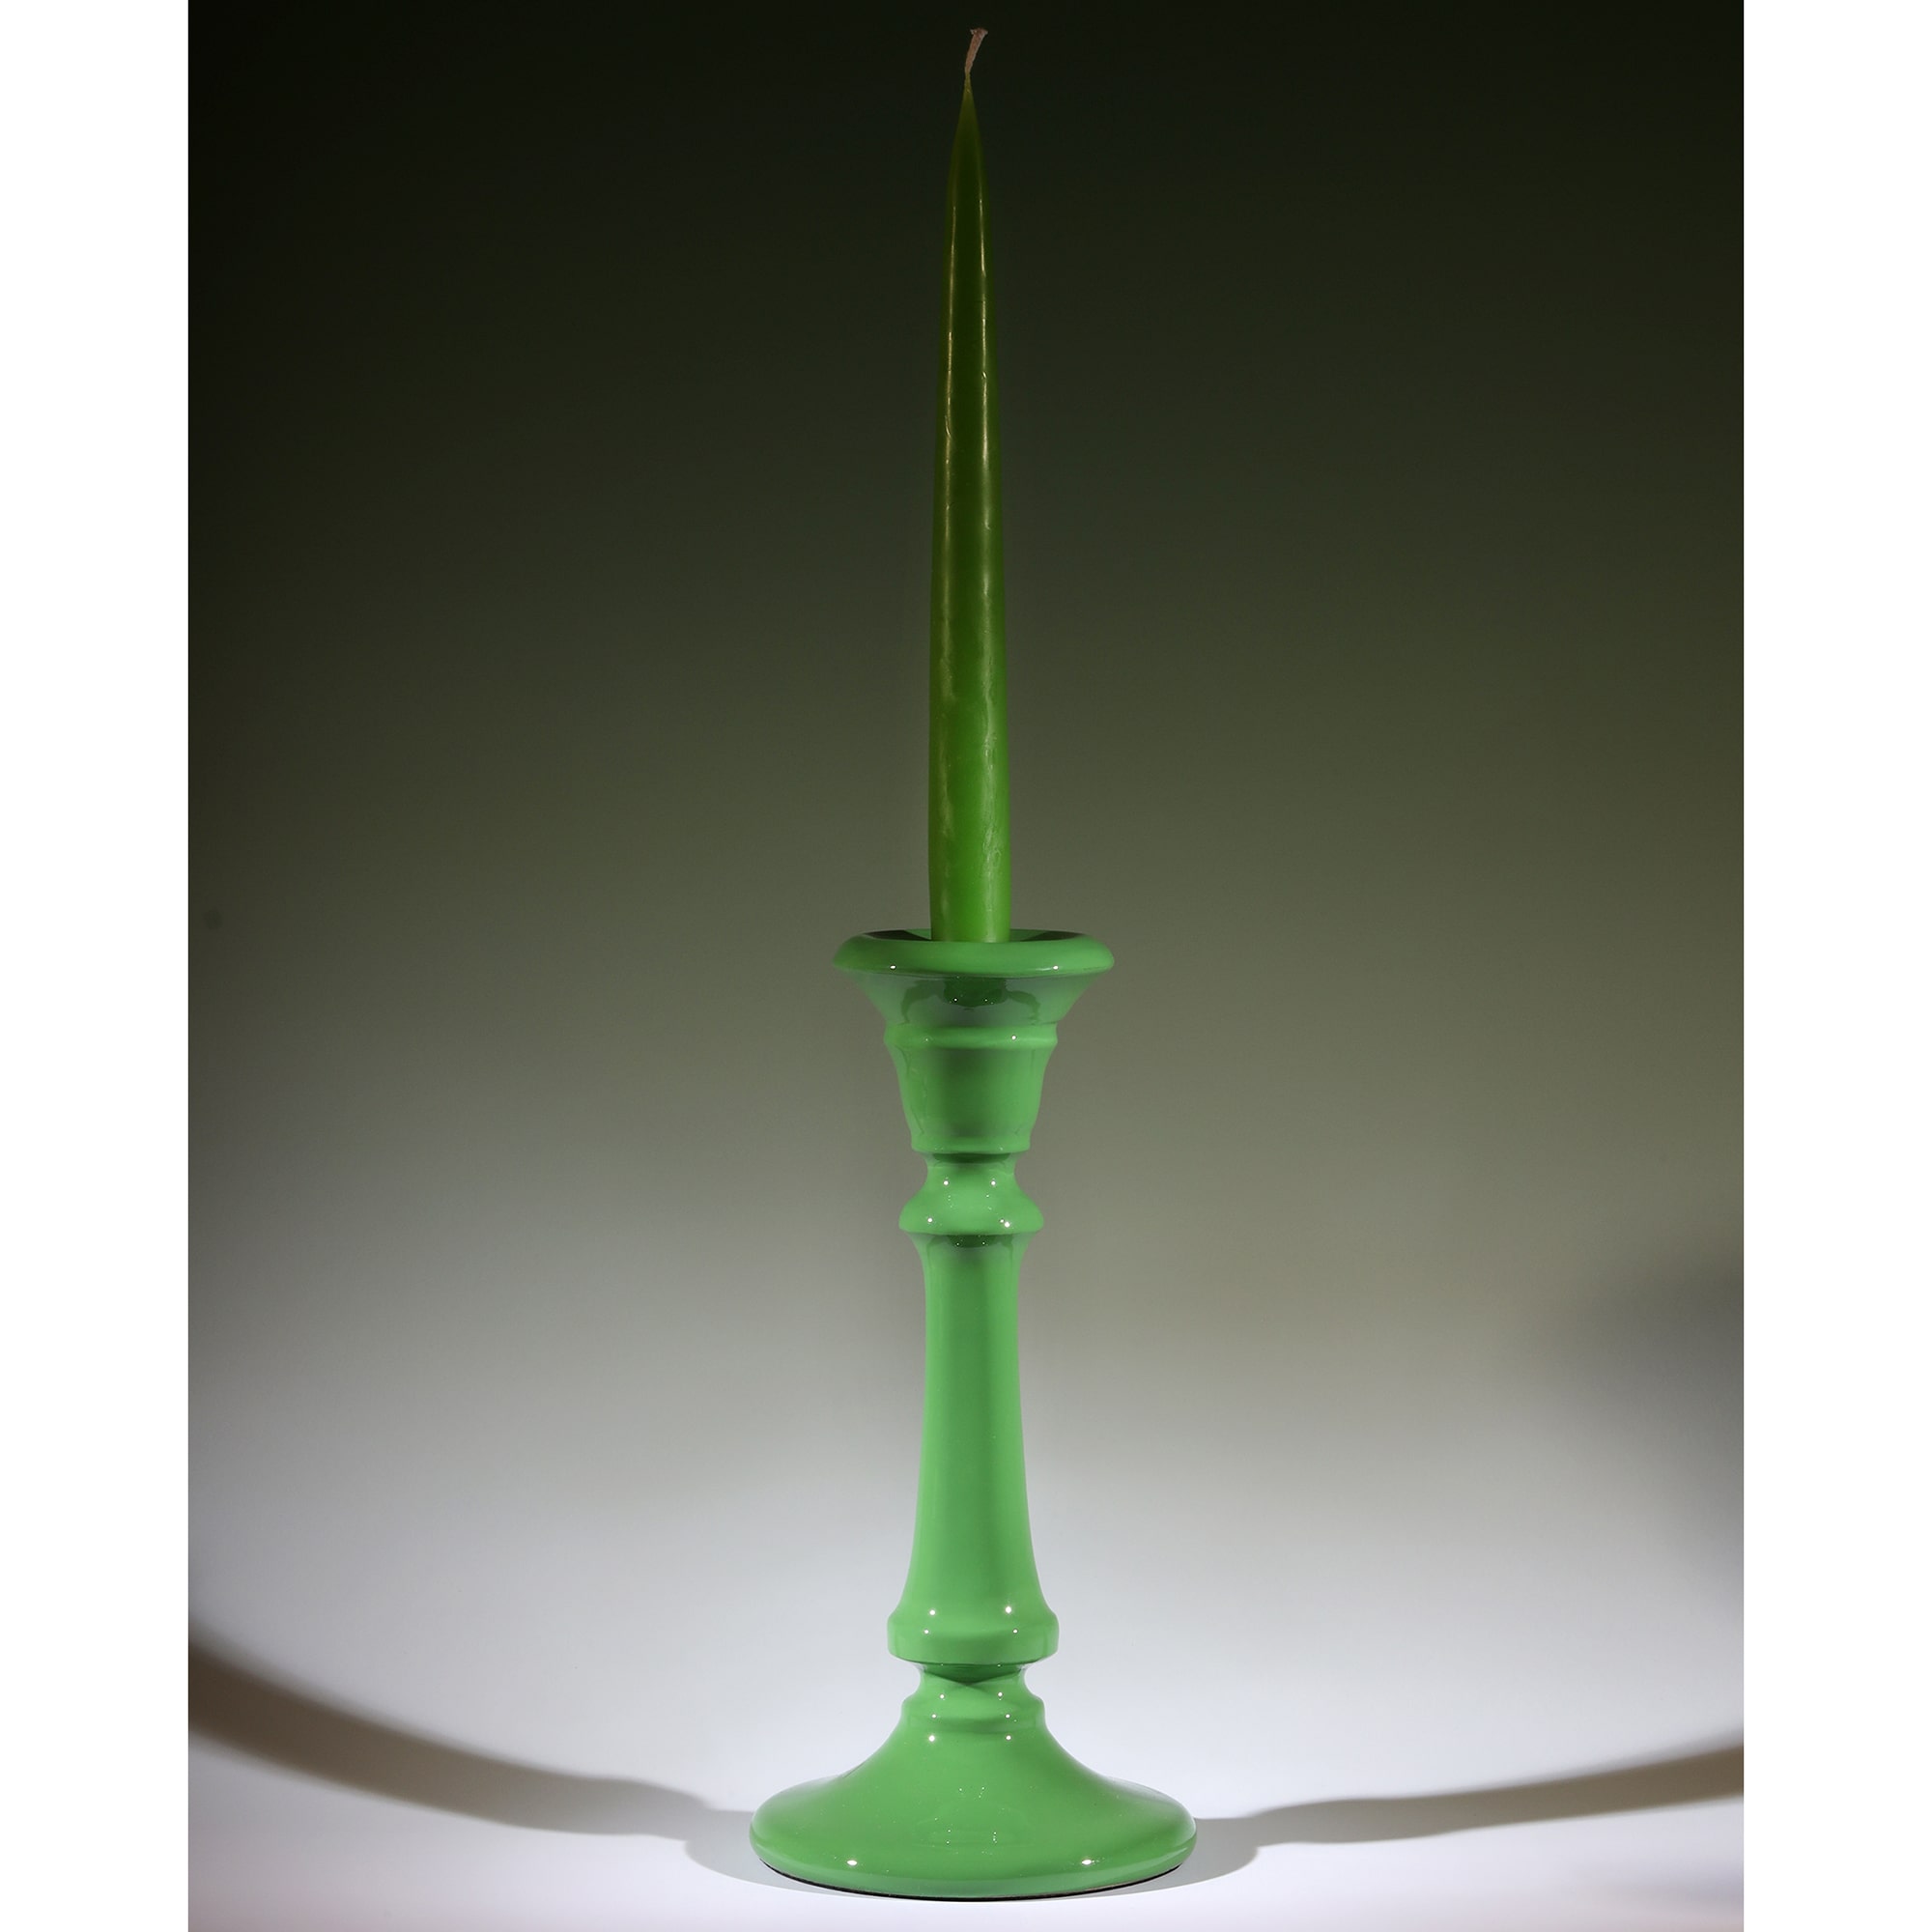 Bud Green Polished Lacquer Tidal Candle holder with a matching candle